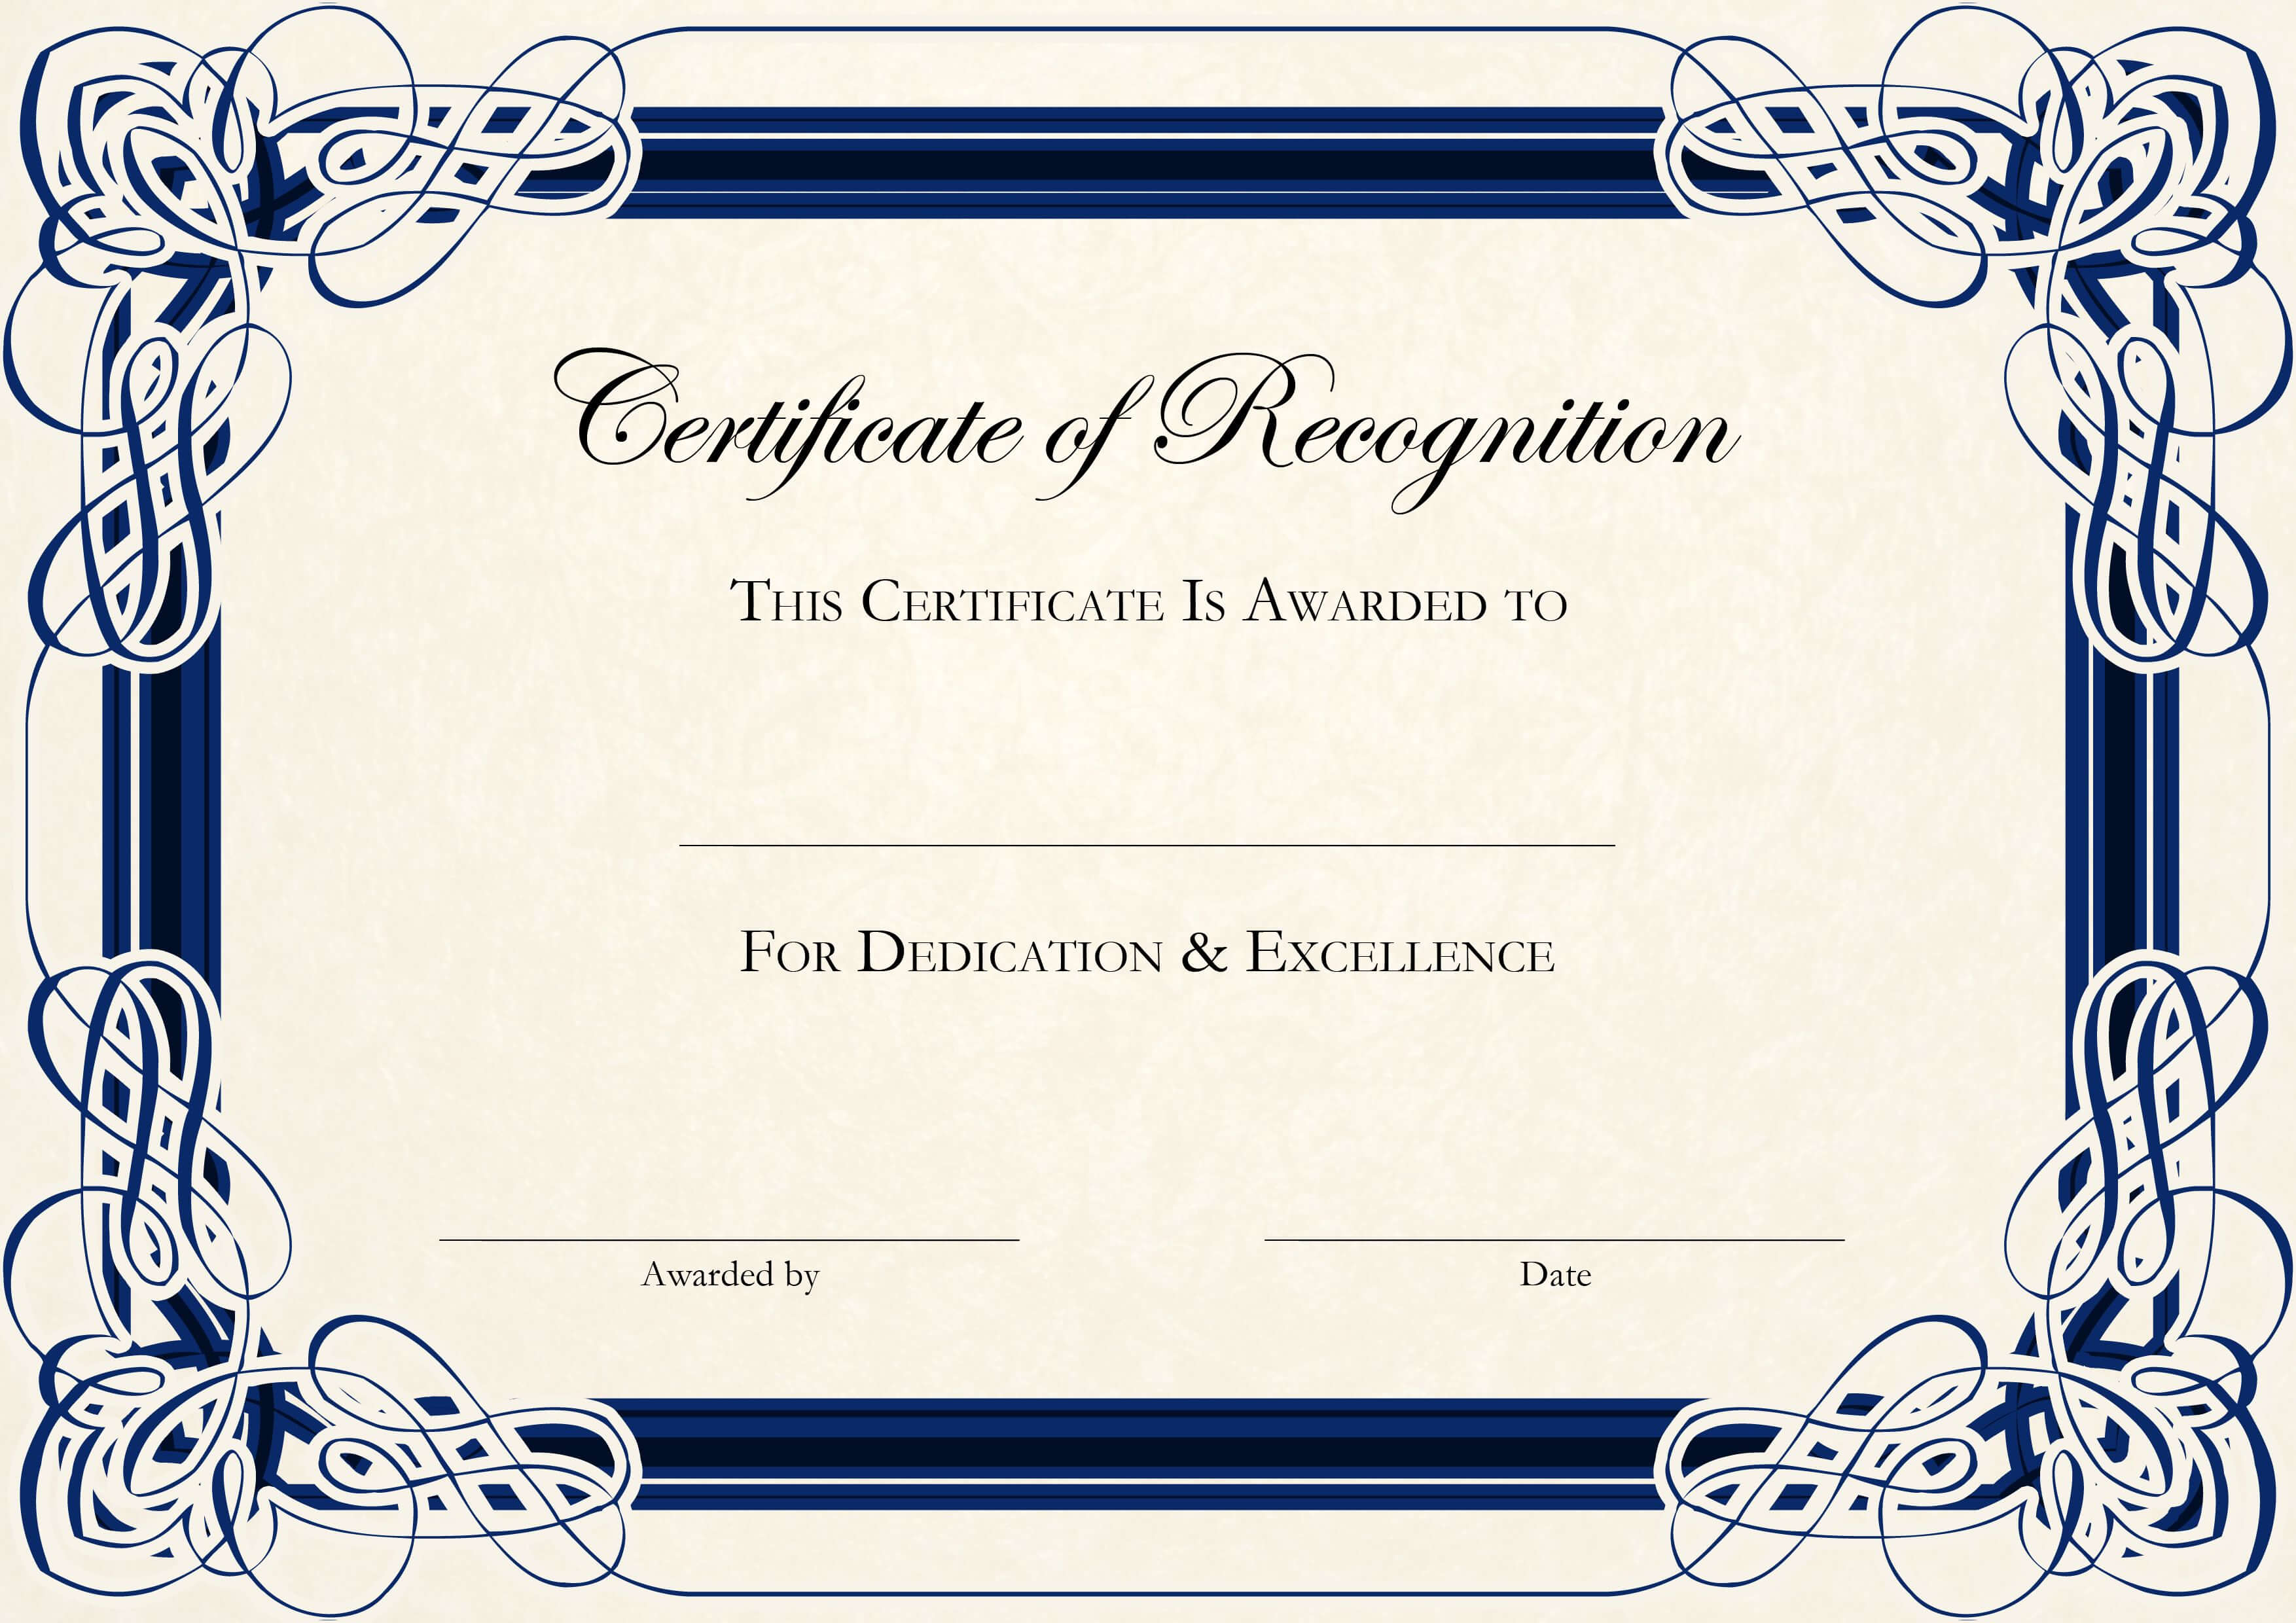 Sports Cetificate | Certificate Of Recognition A4 Thumbnail Throughout Free Art Certificate Templates